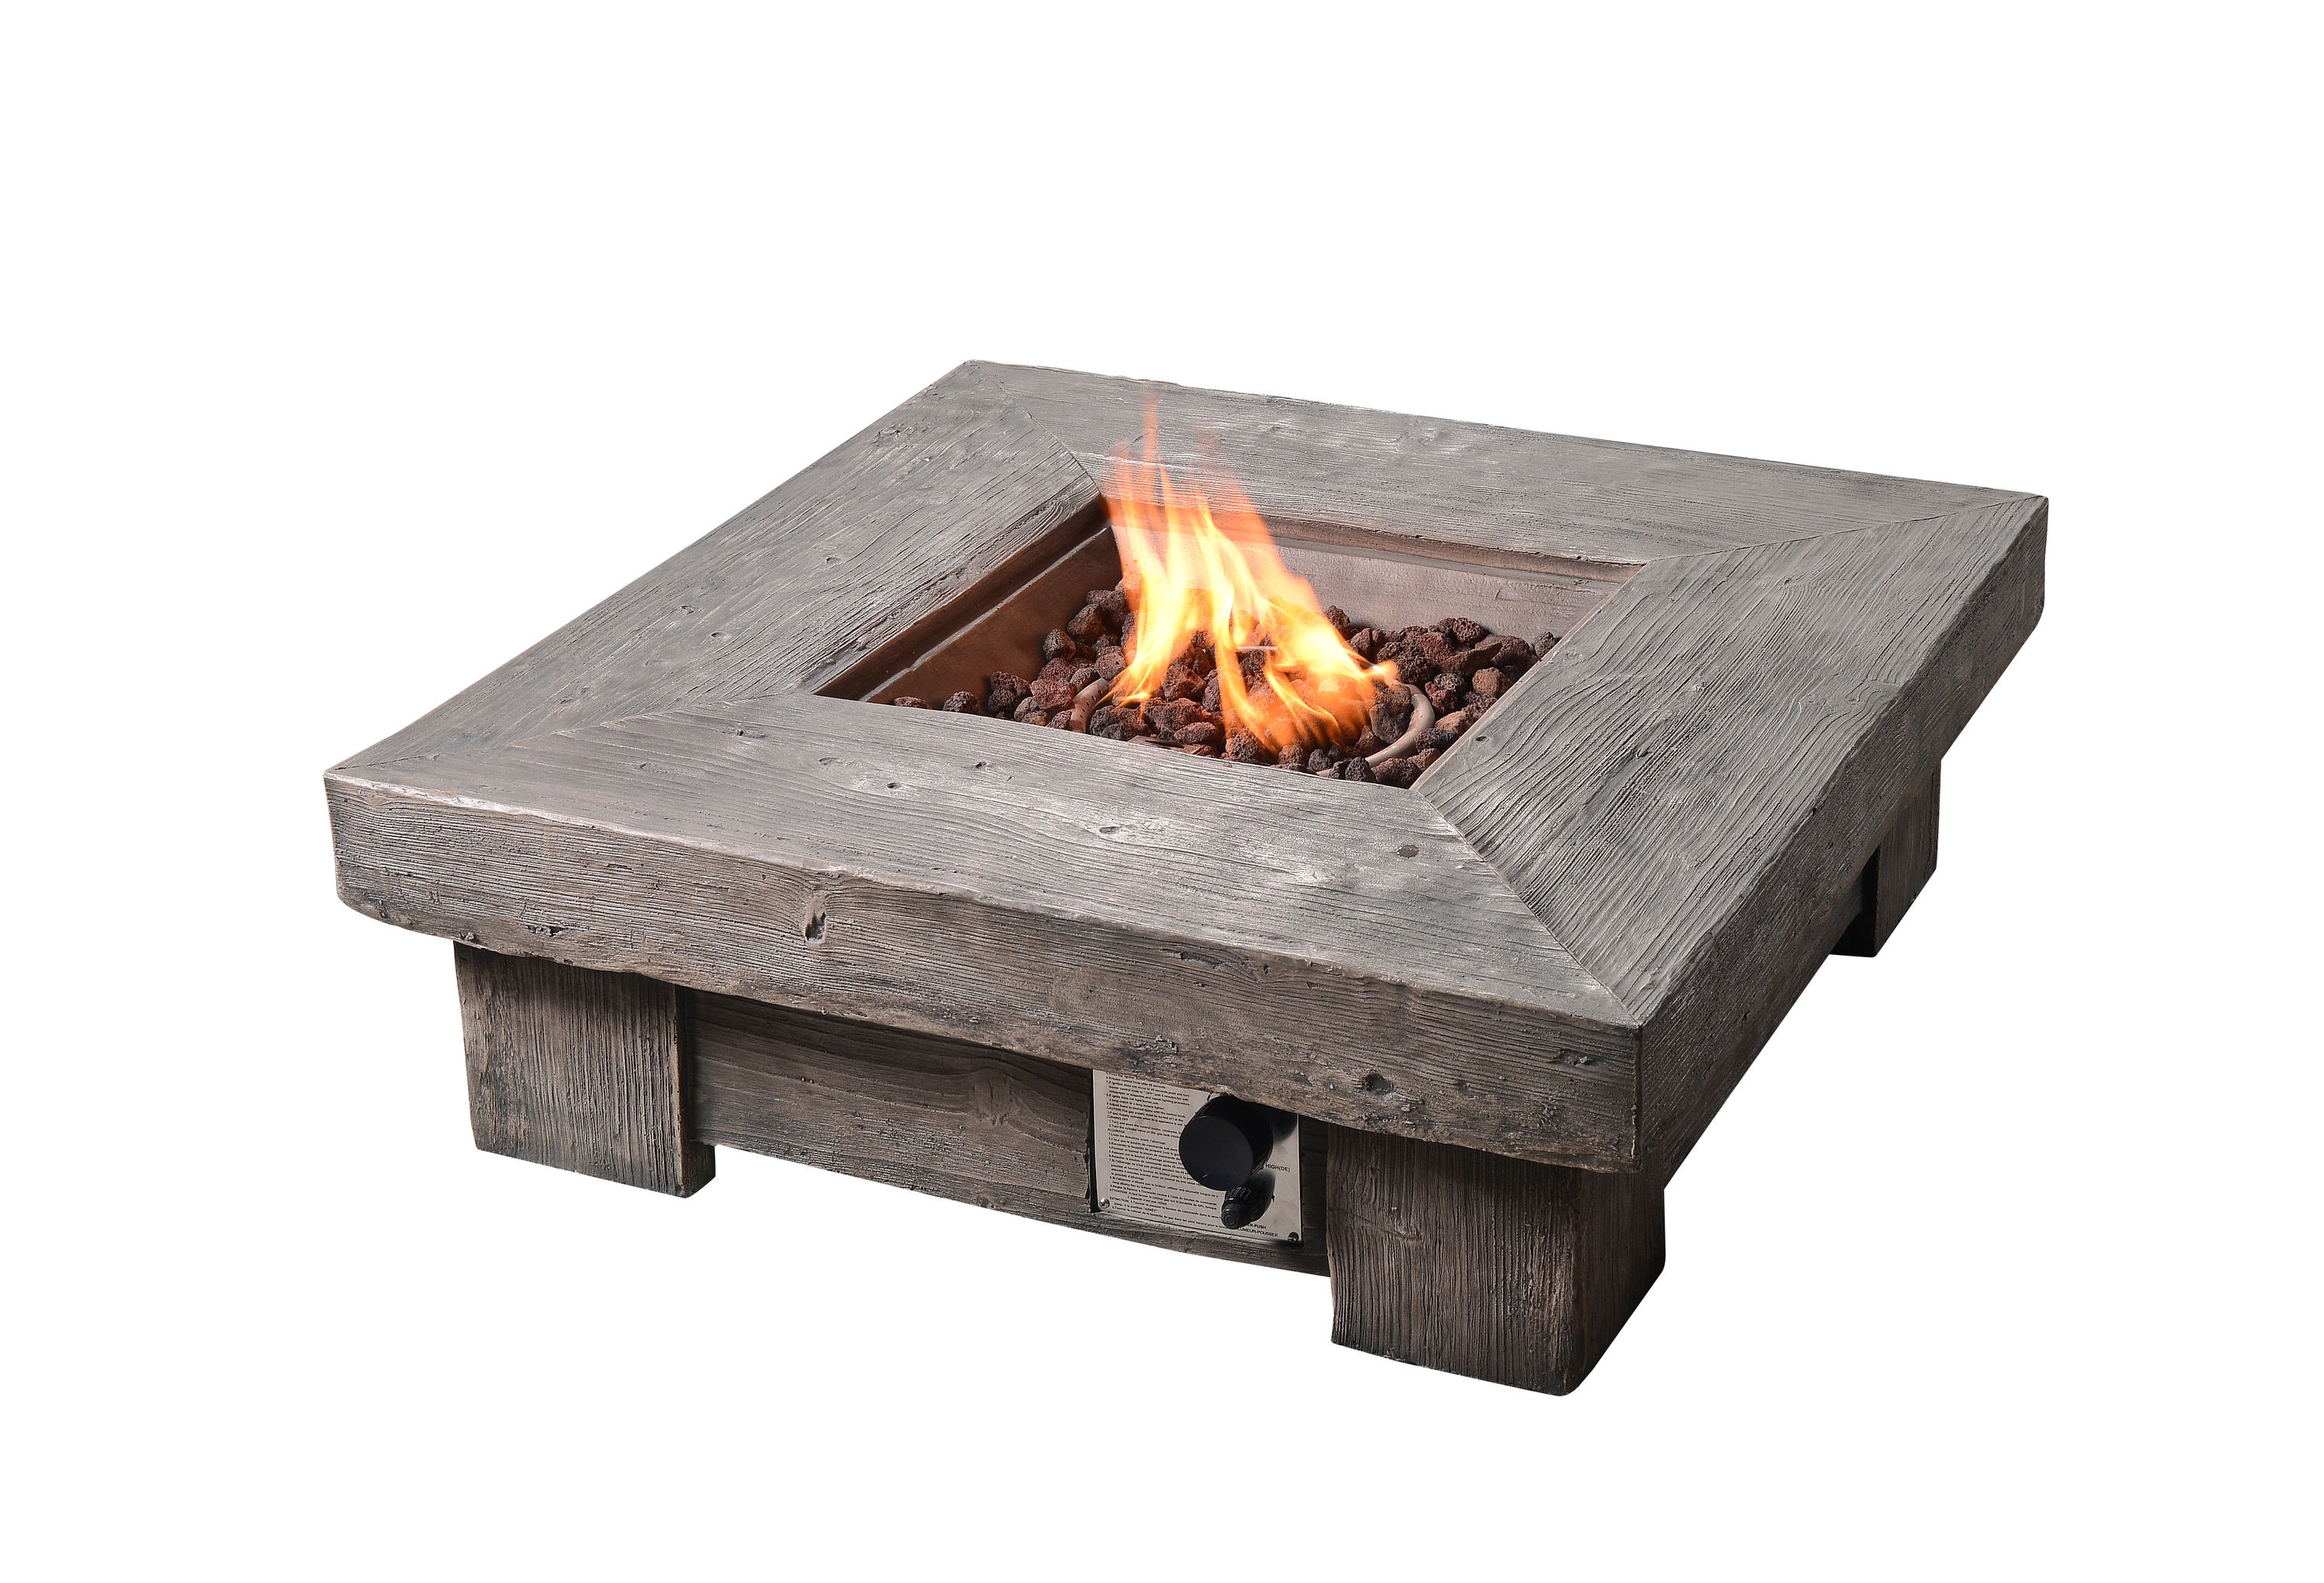 Wood Composite Propane Gas Fire Pit, Are Propane Fire Pits Safe On Composite Decks